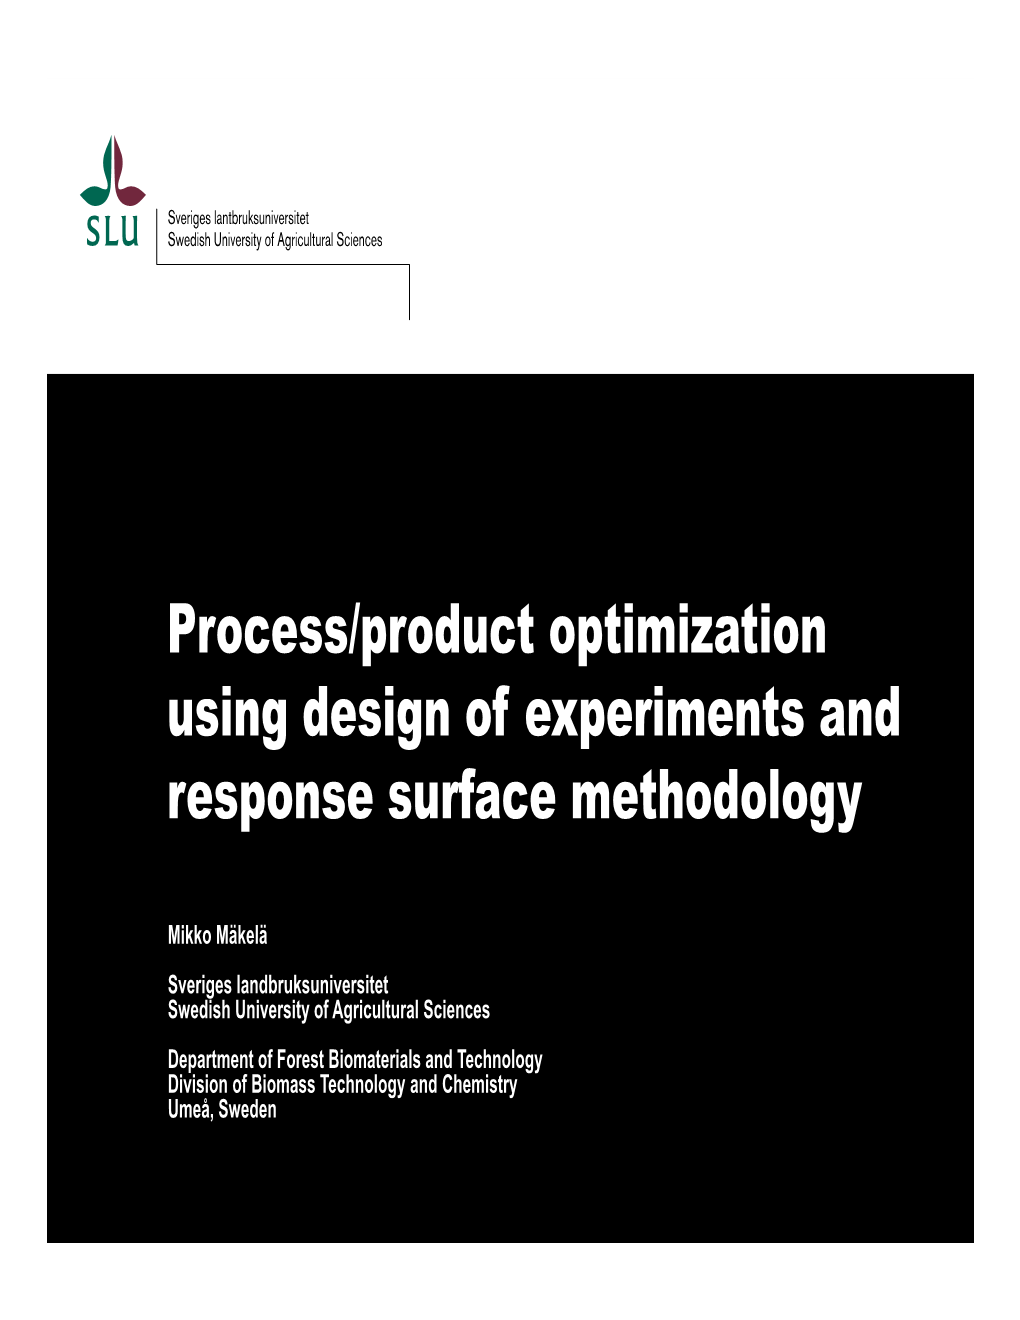 Process/Product Optimization Using Design of Experiments and Response Surface Methodology